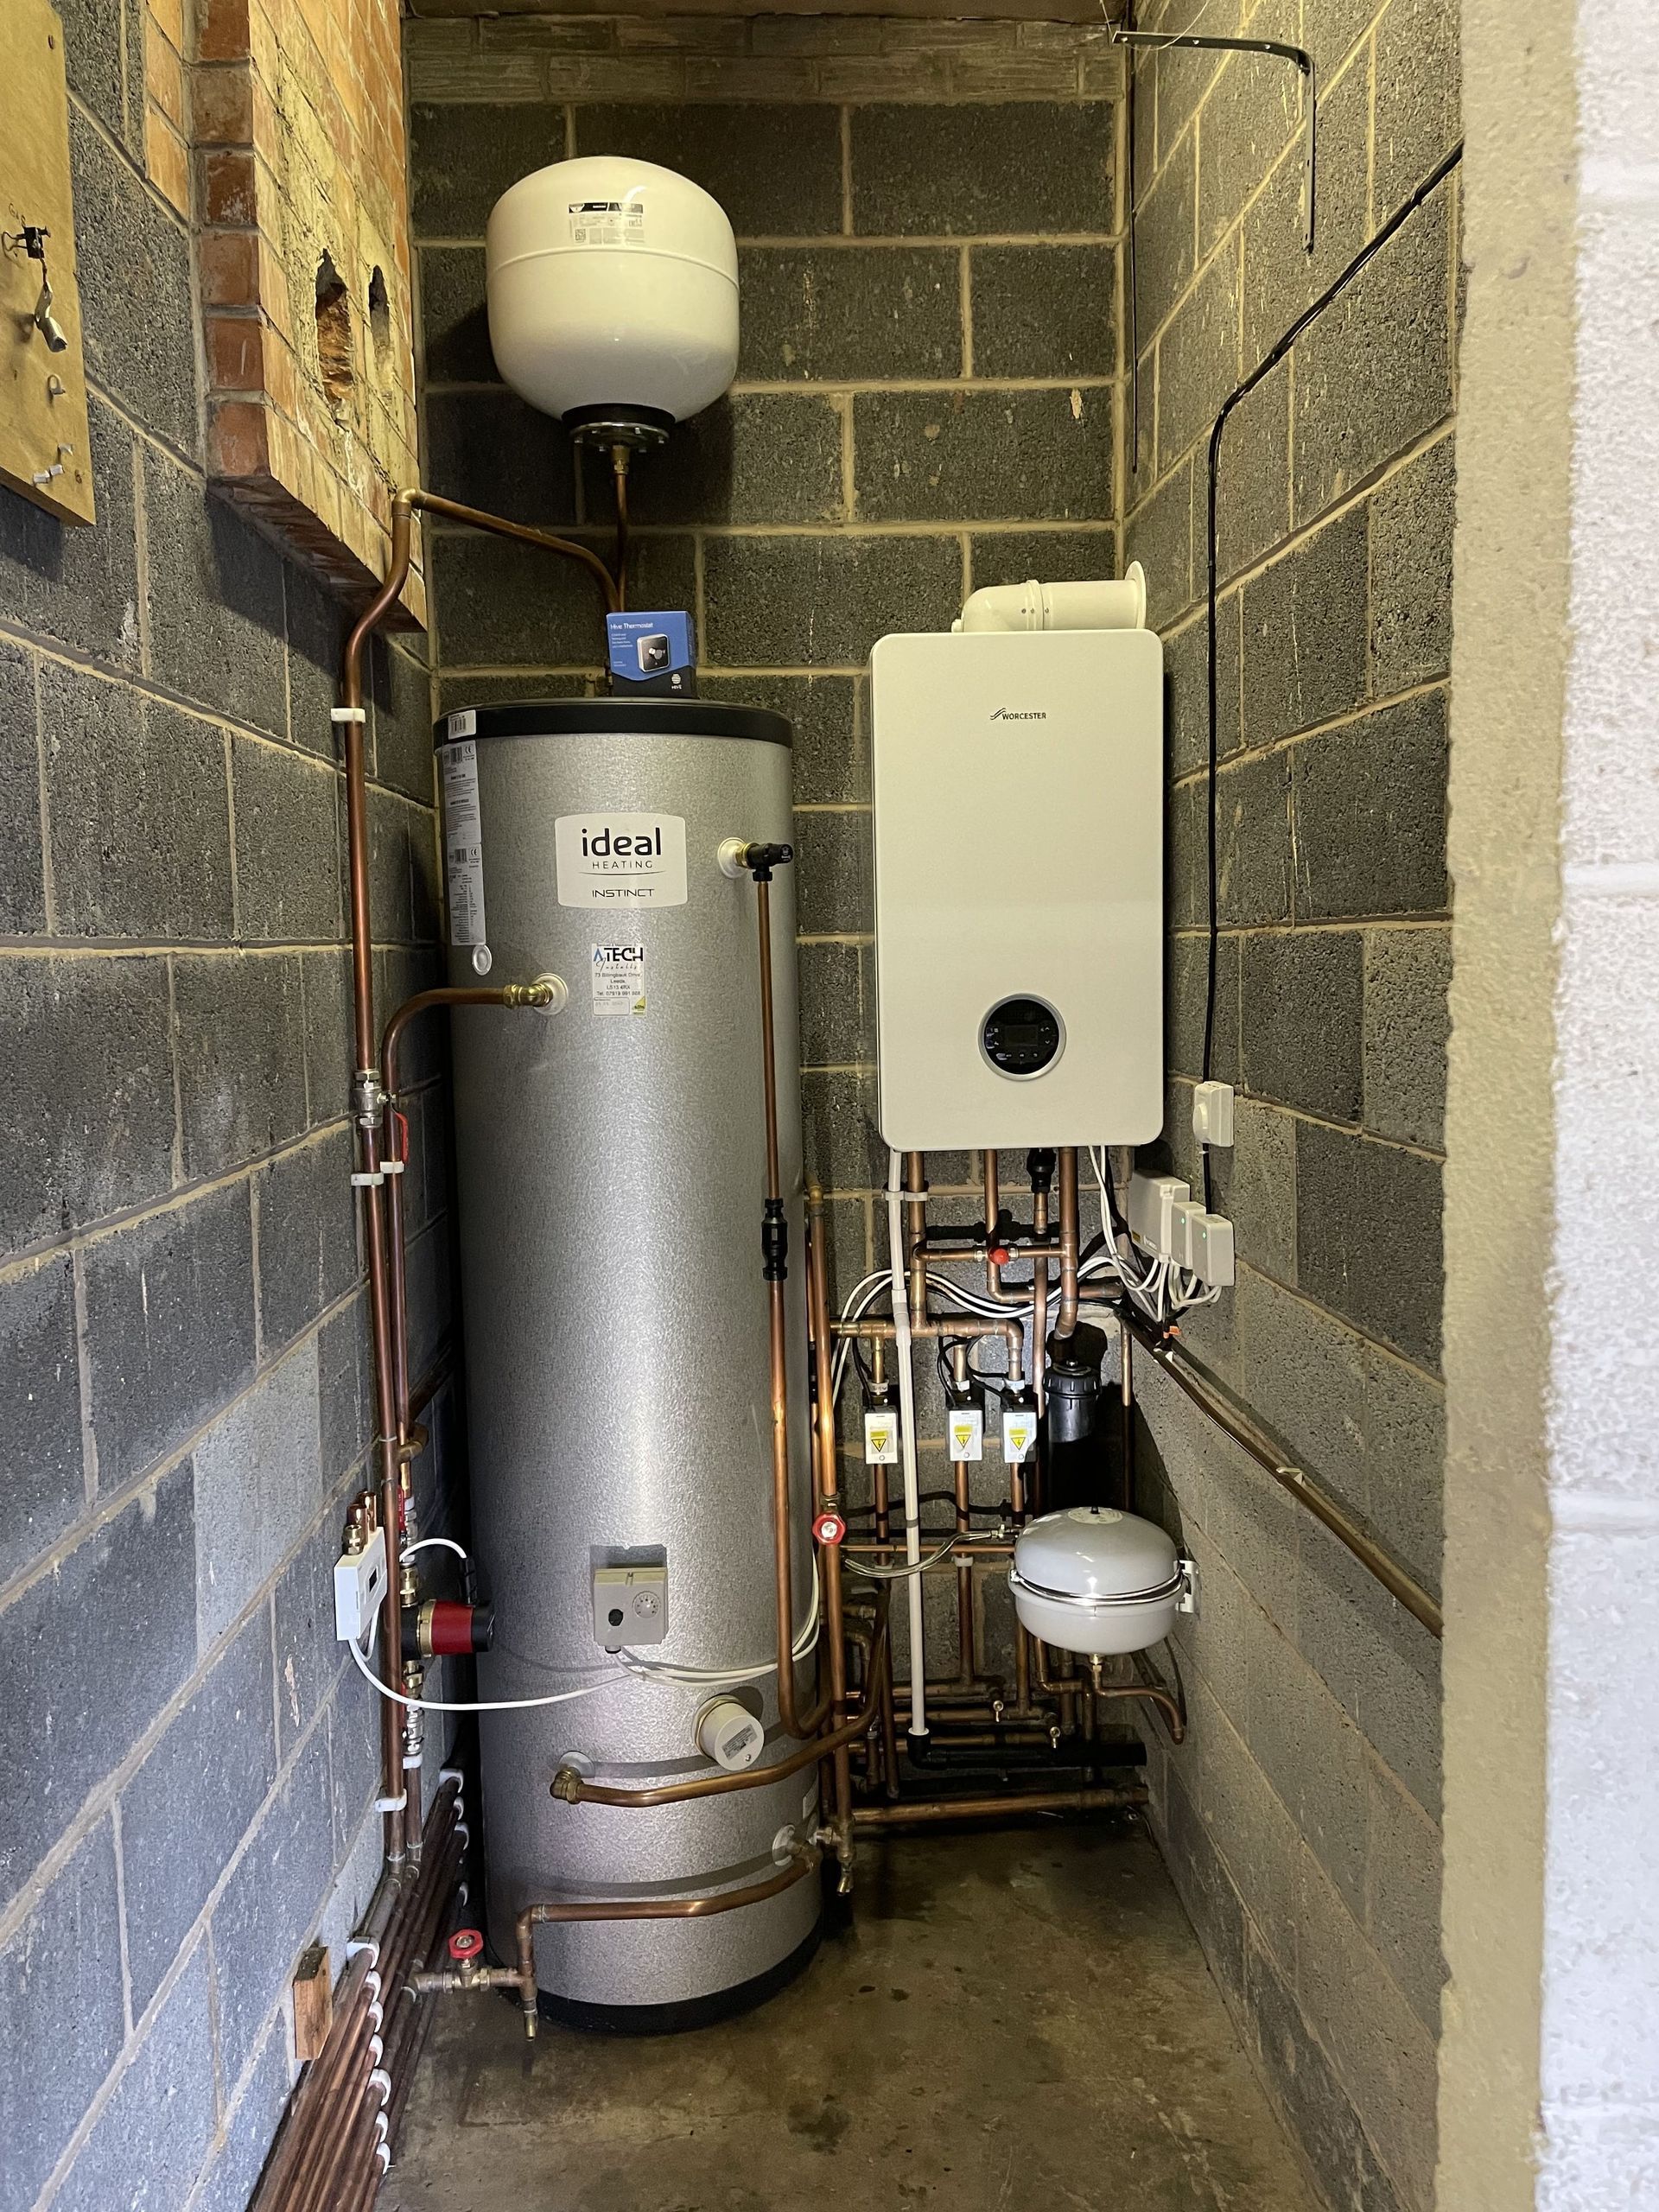 Unvented cylinder (water heater) with boiler in room